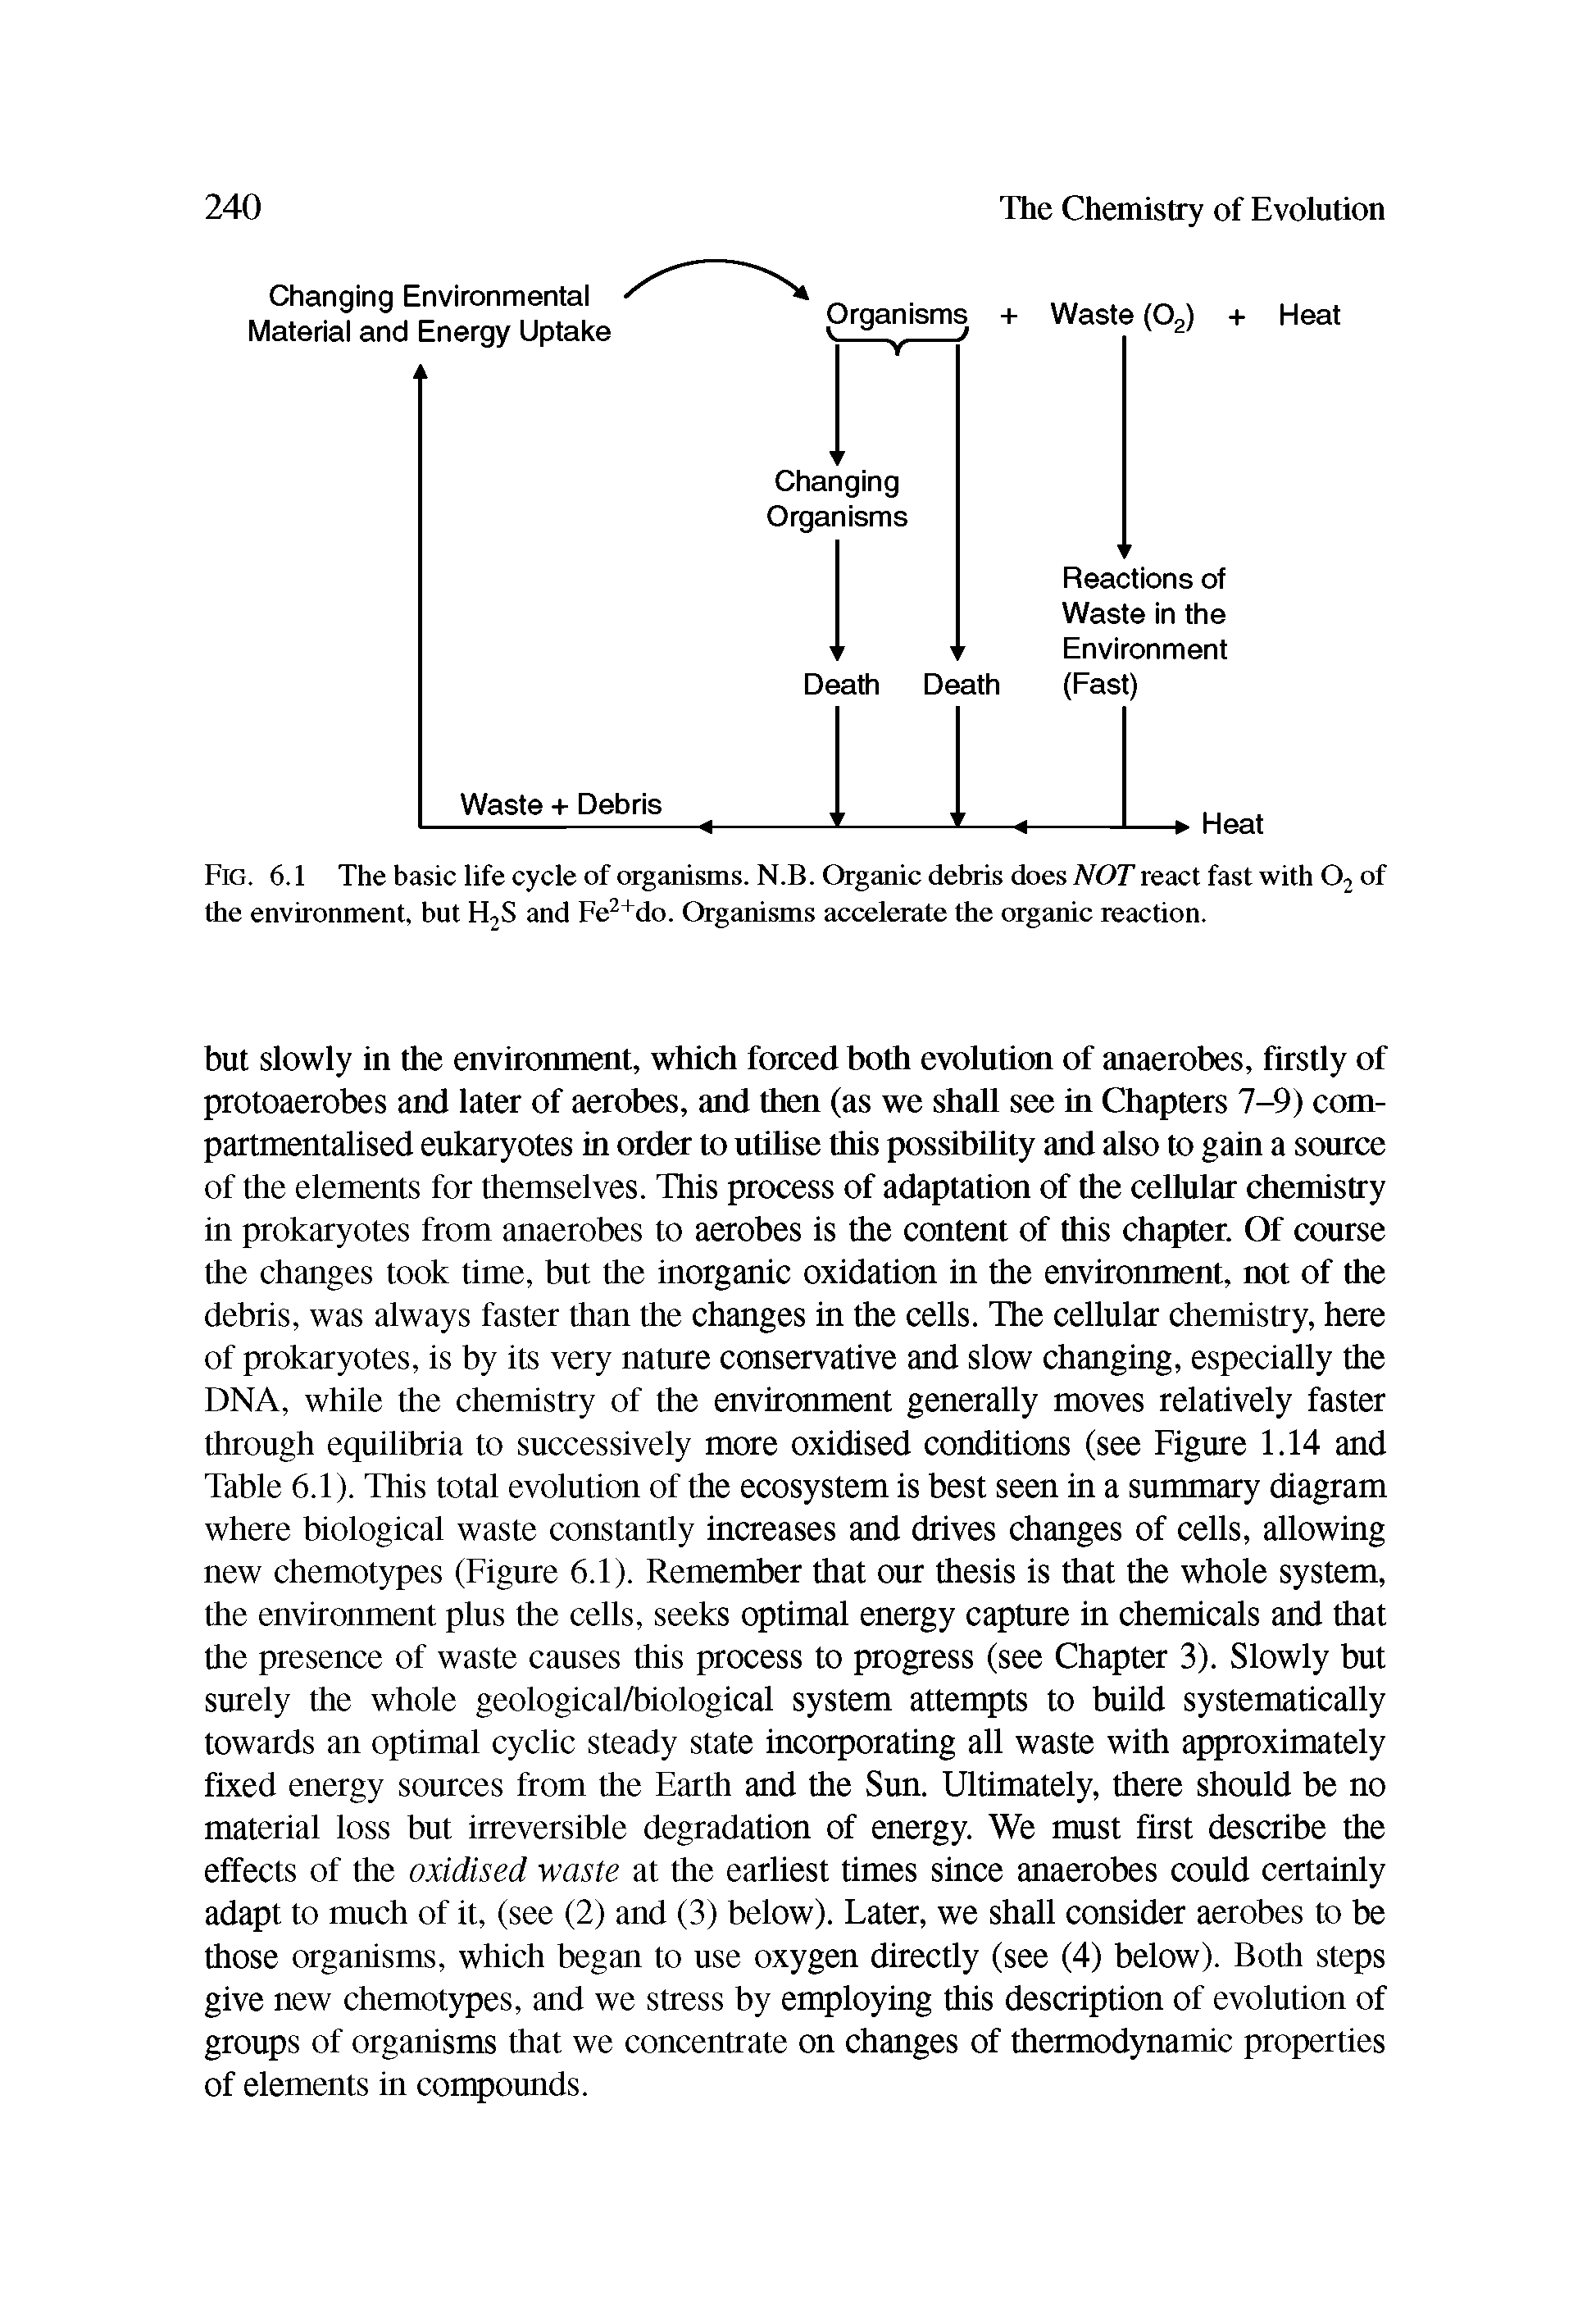 Fig. 6.1 The basic life cycle of organisms. N.B. Organic debris does NOT react fast with 02 of the environment, but H2S and Fe2+do. Organisms accelerate the organic reaction.